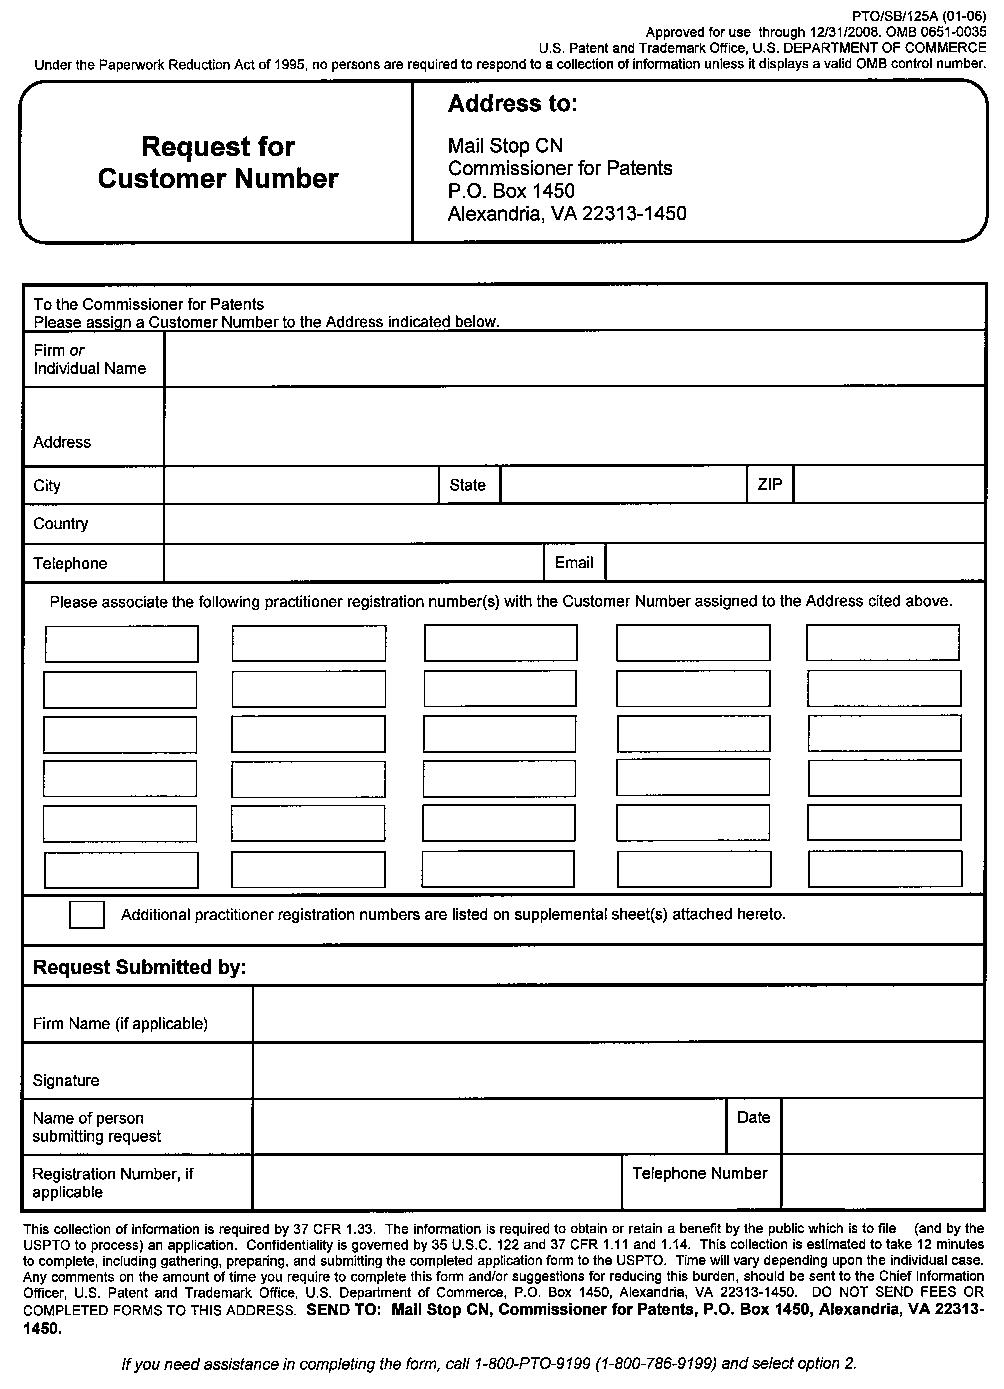 form pto/sb/25a request for customer number